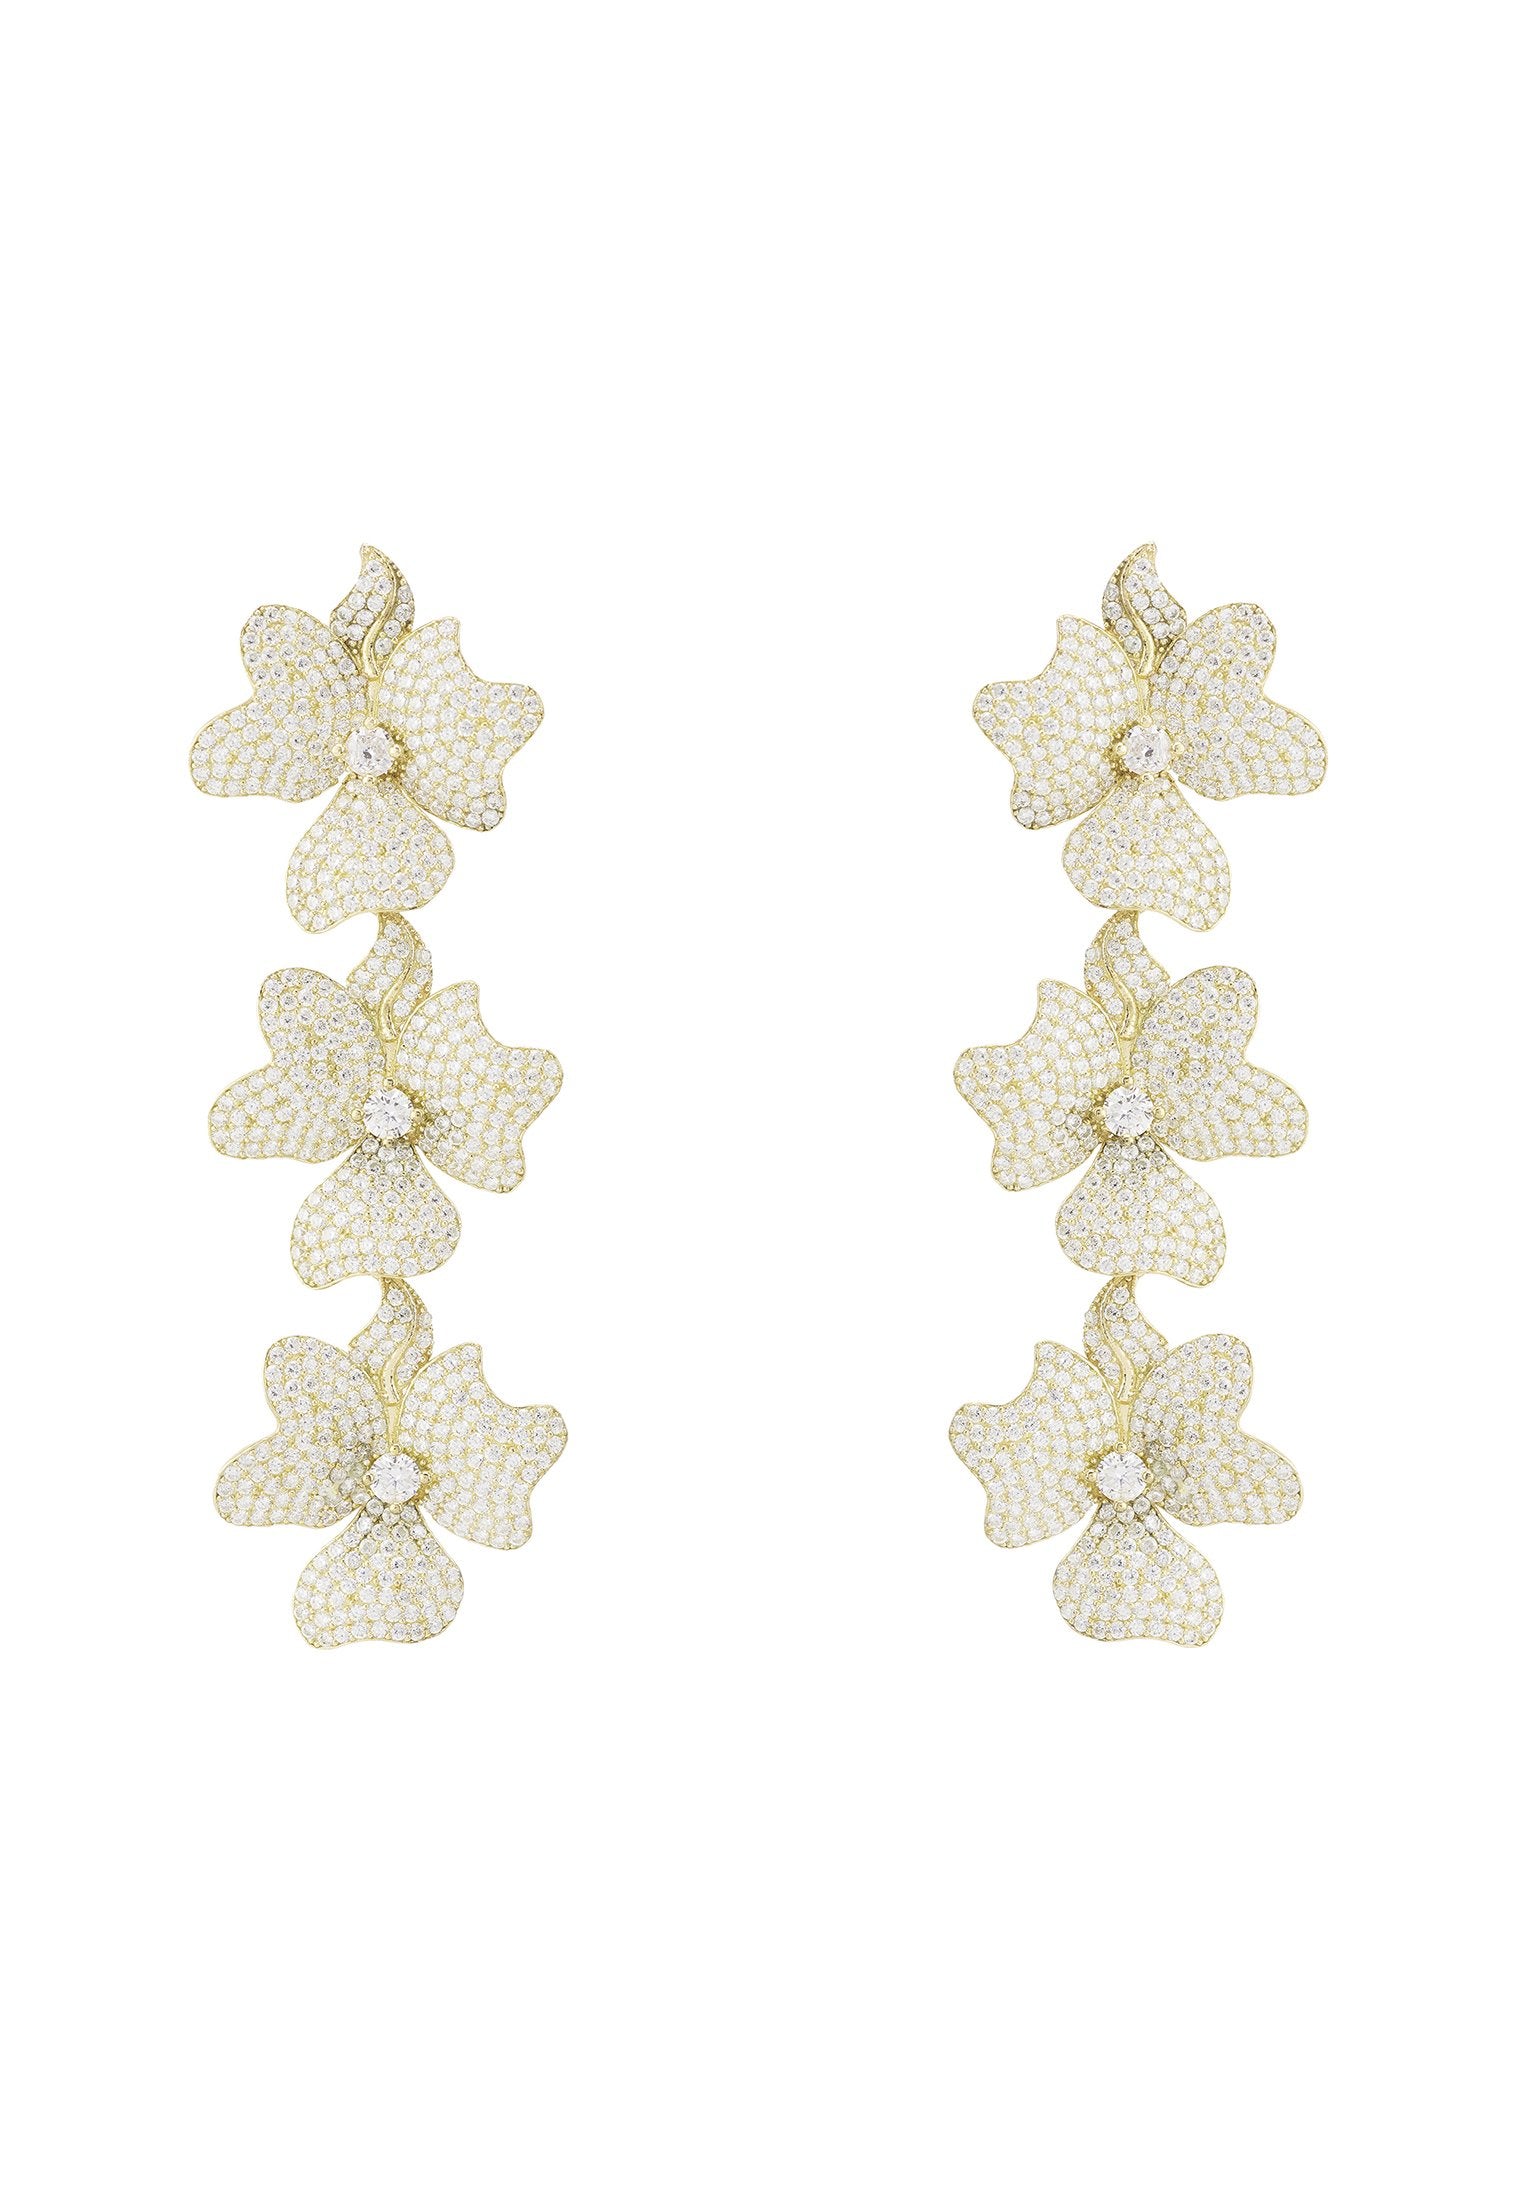 Gold Triple Flower Drop Earrings with Cubic Zirconia - Perfect for Bridal and Evening Wear - Jewelry & Watches - Bijou Her -  -  - 